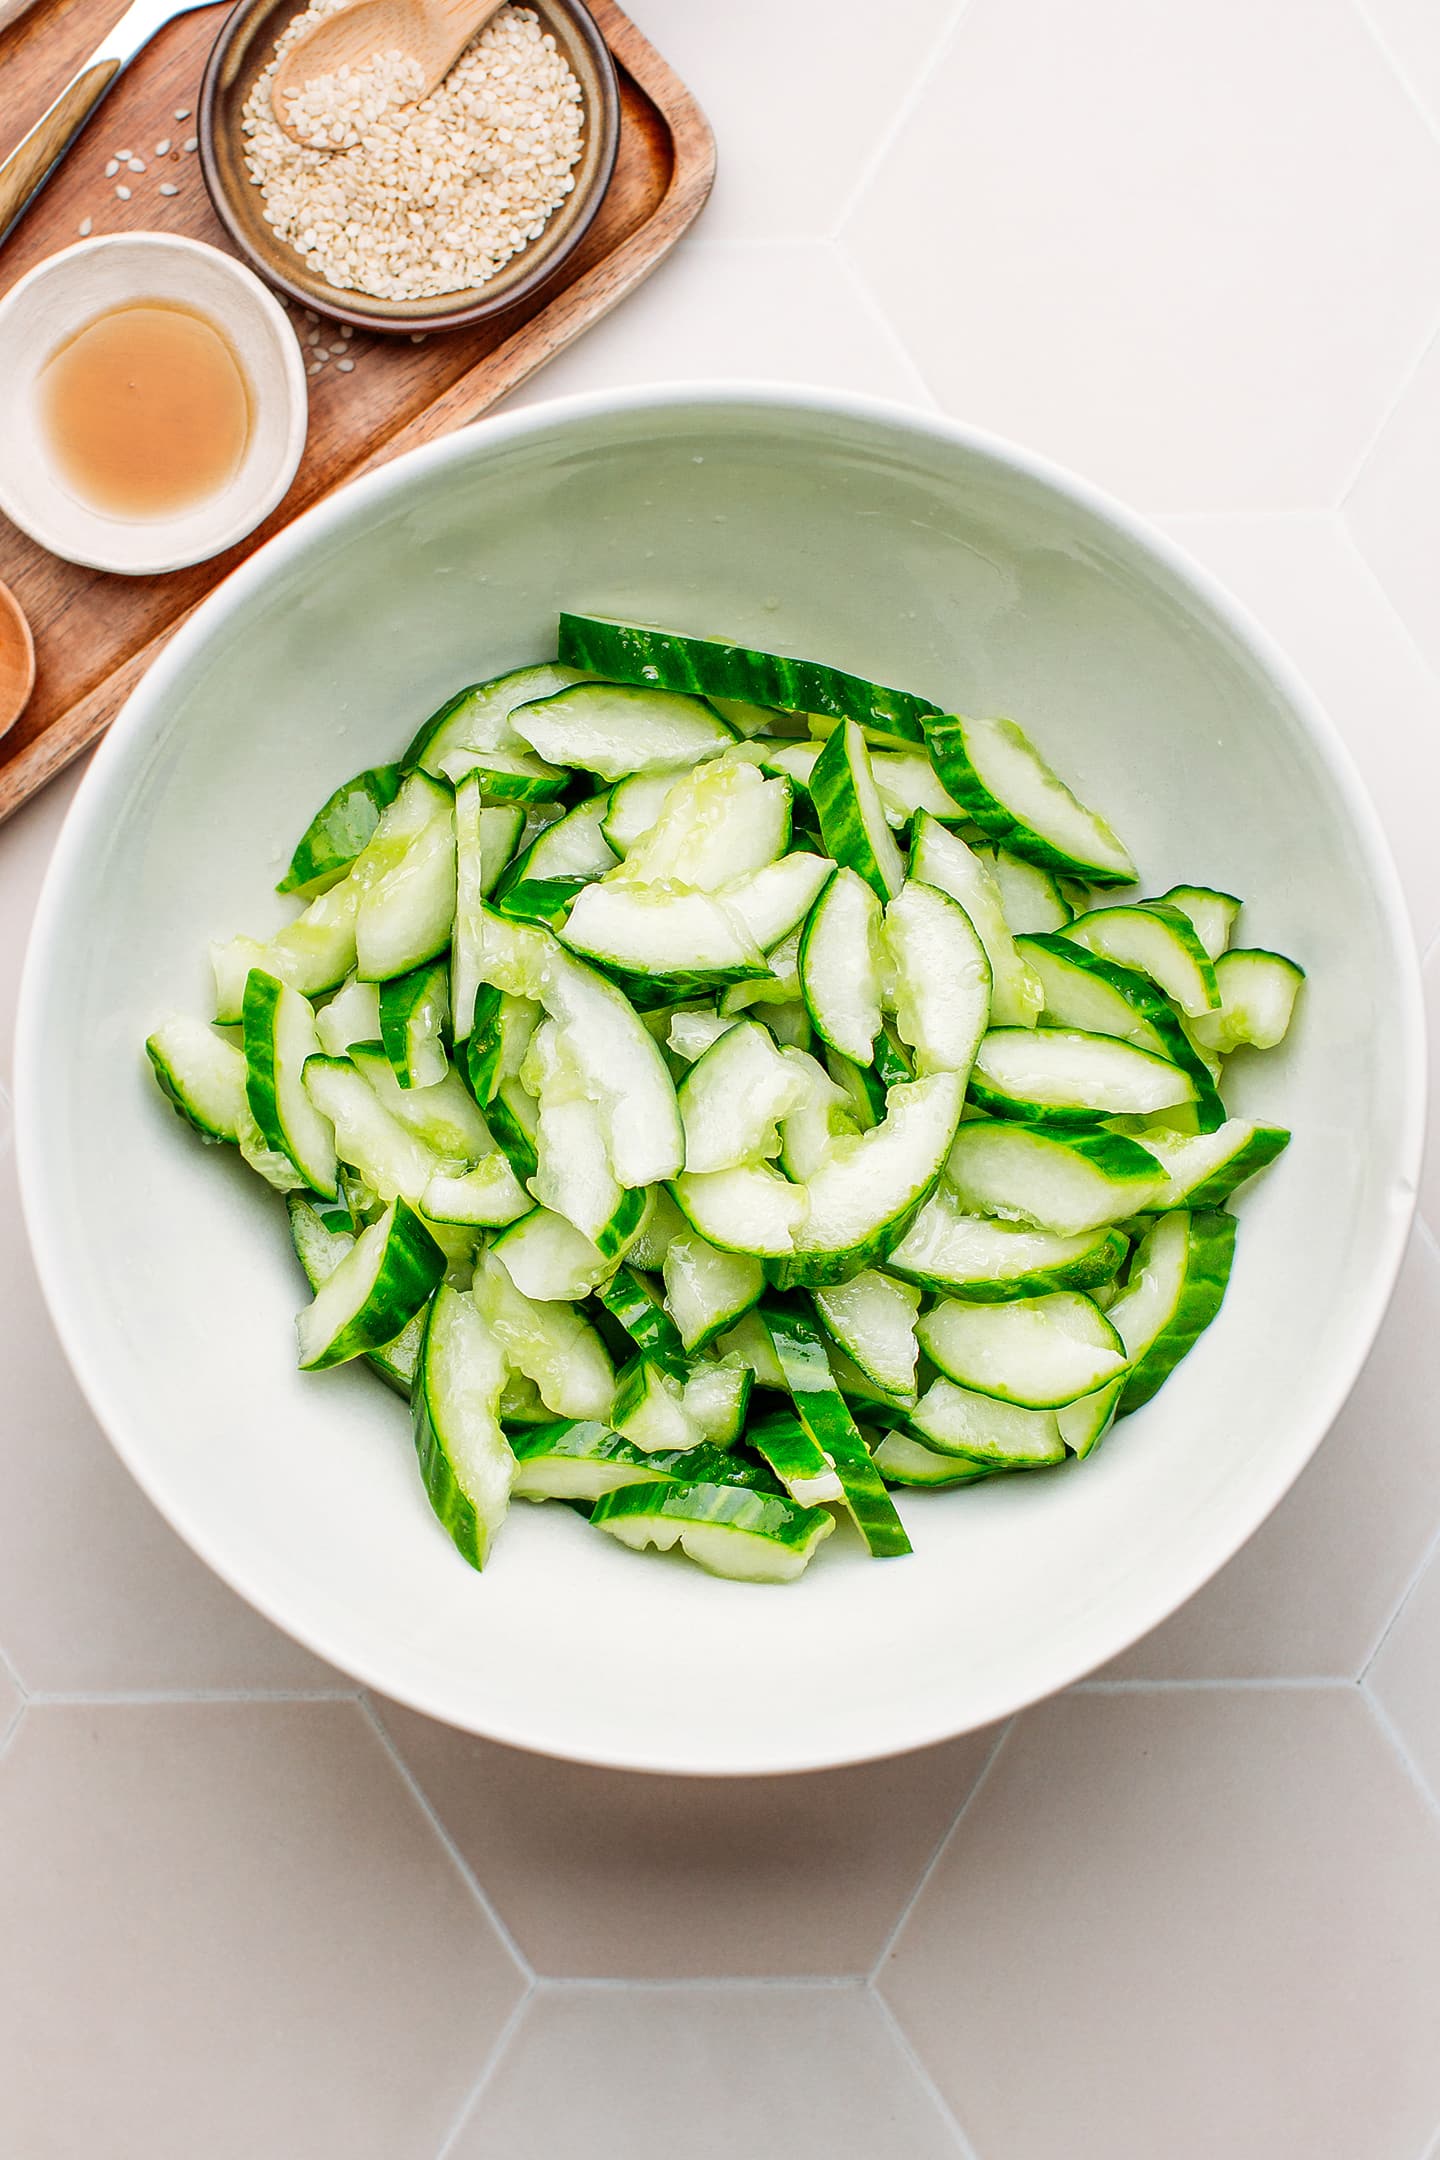 Smashed cucumbers in a mixing bowl.